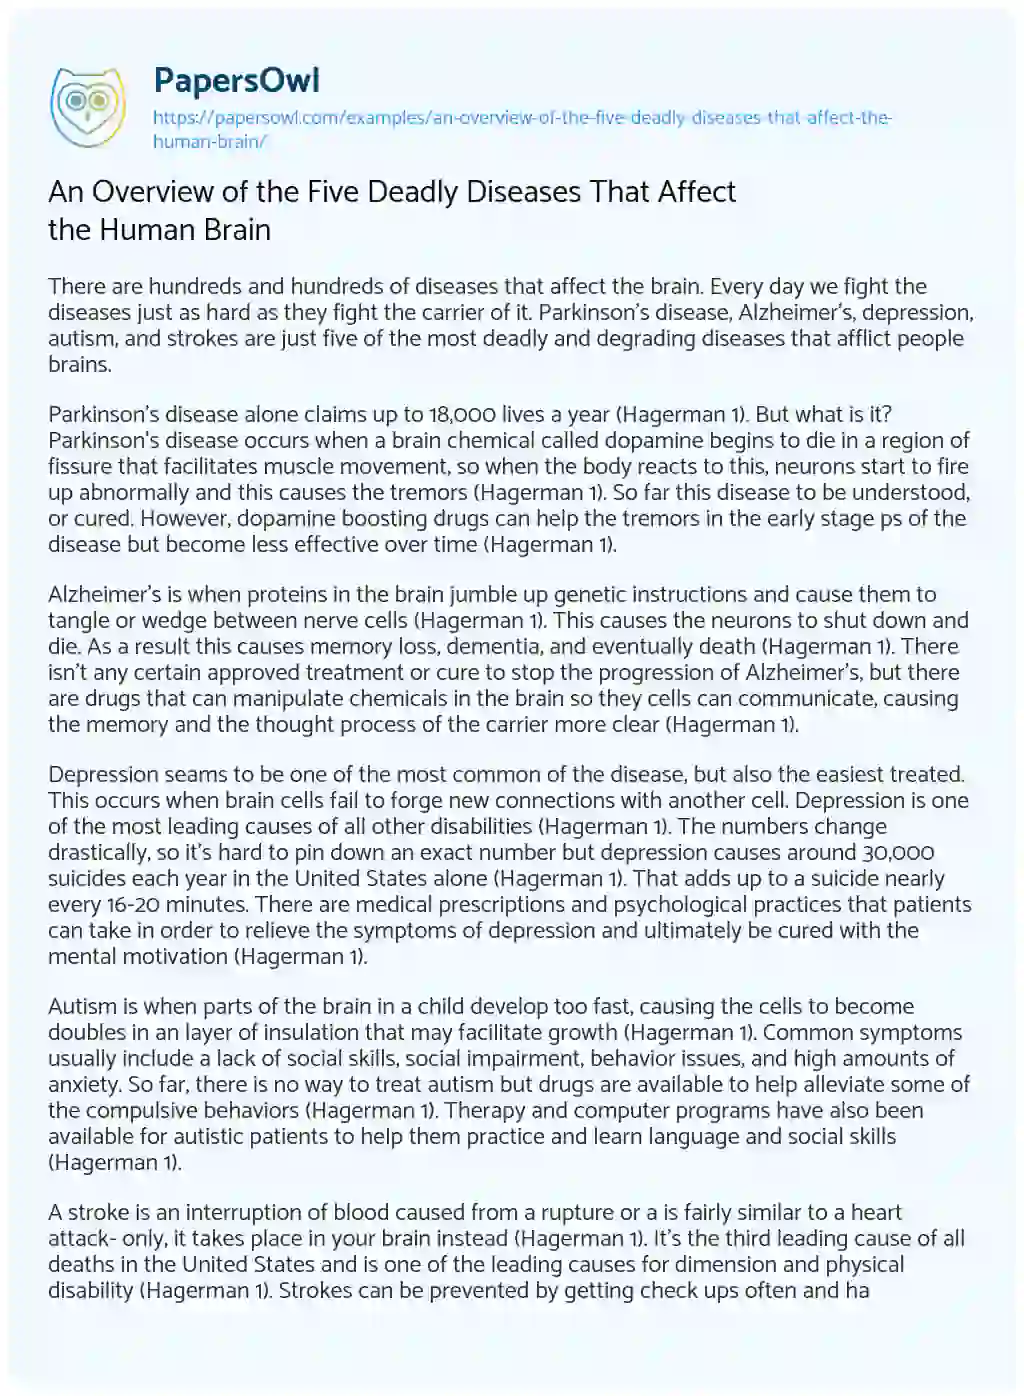 Essay on An Overview of the Five Deadly Diseases that Affect the Human Brain